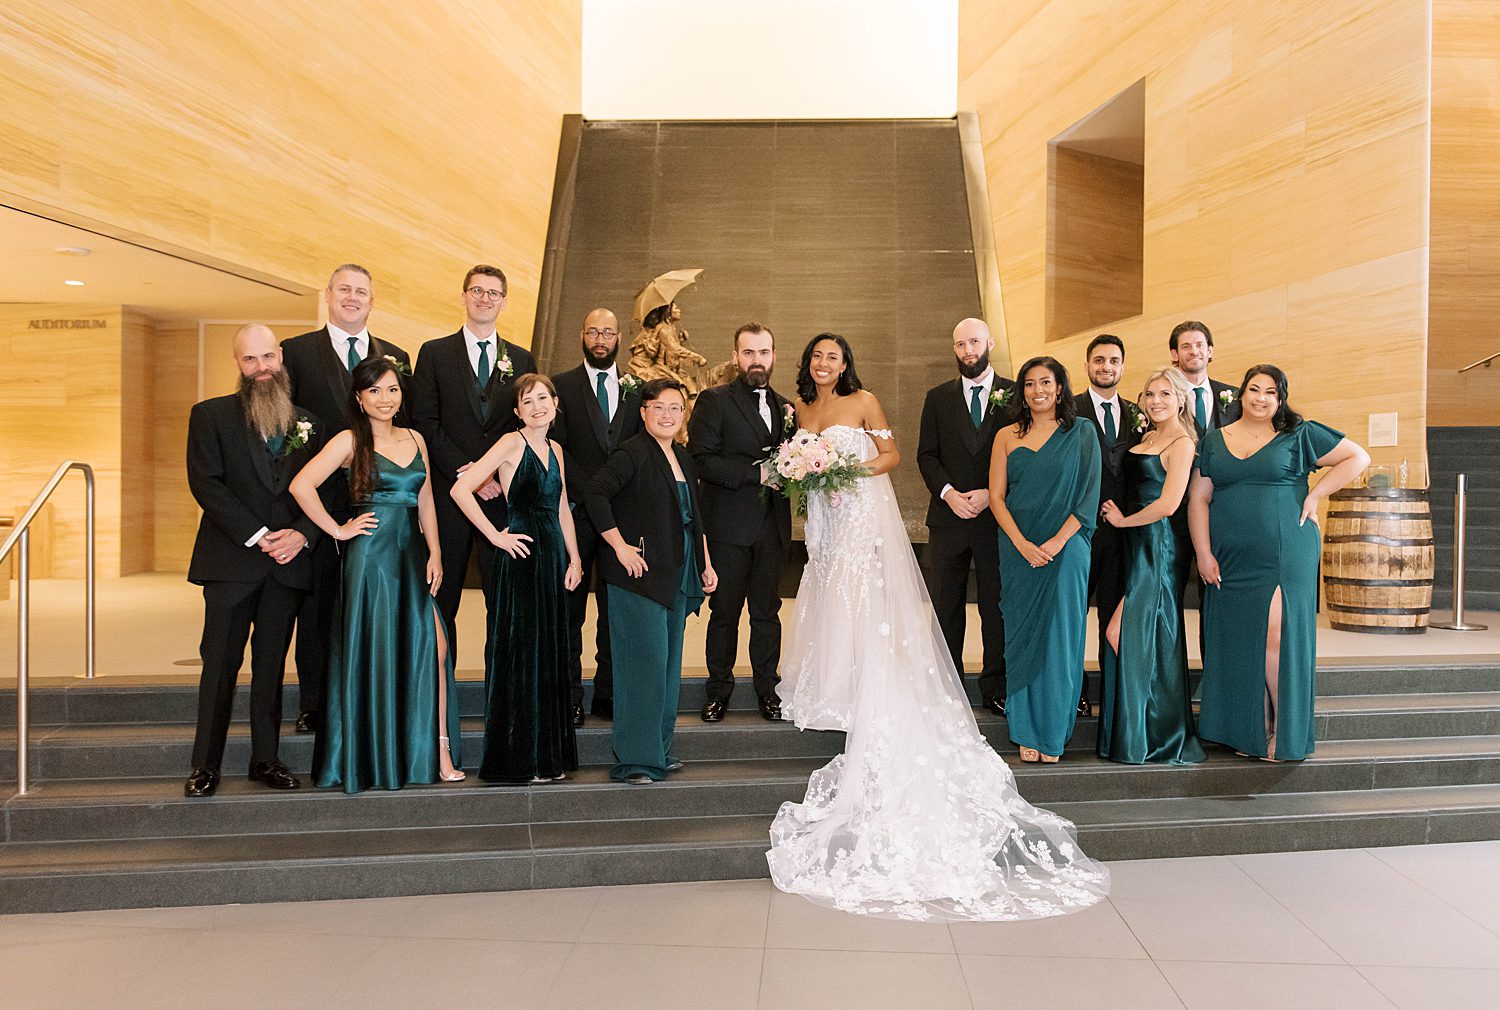 bride and groom stand on steps with wedding party in teal dresses with black suits outside The James Museum